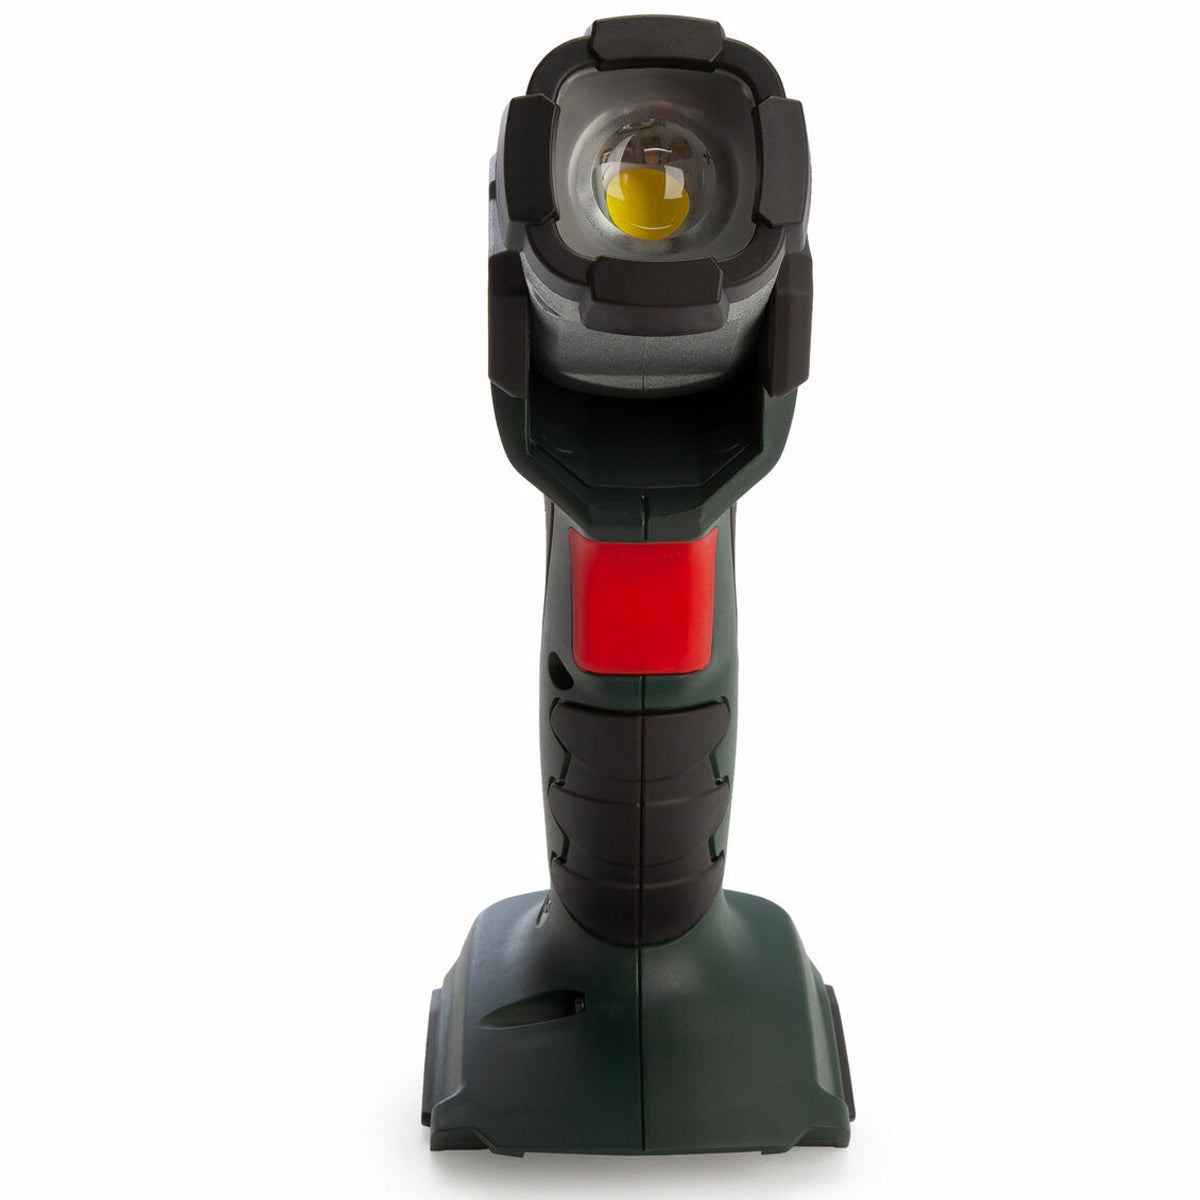 Metabo 600368000 14.4-18V Cordless Torch Body Only in Card Box